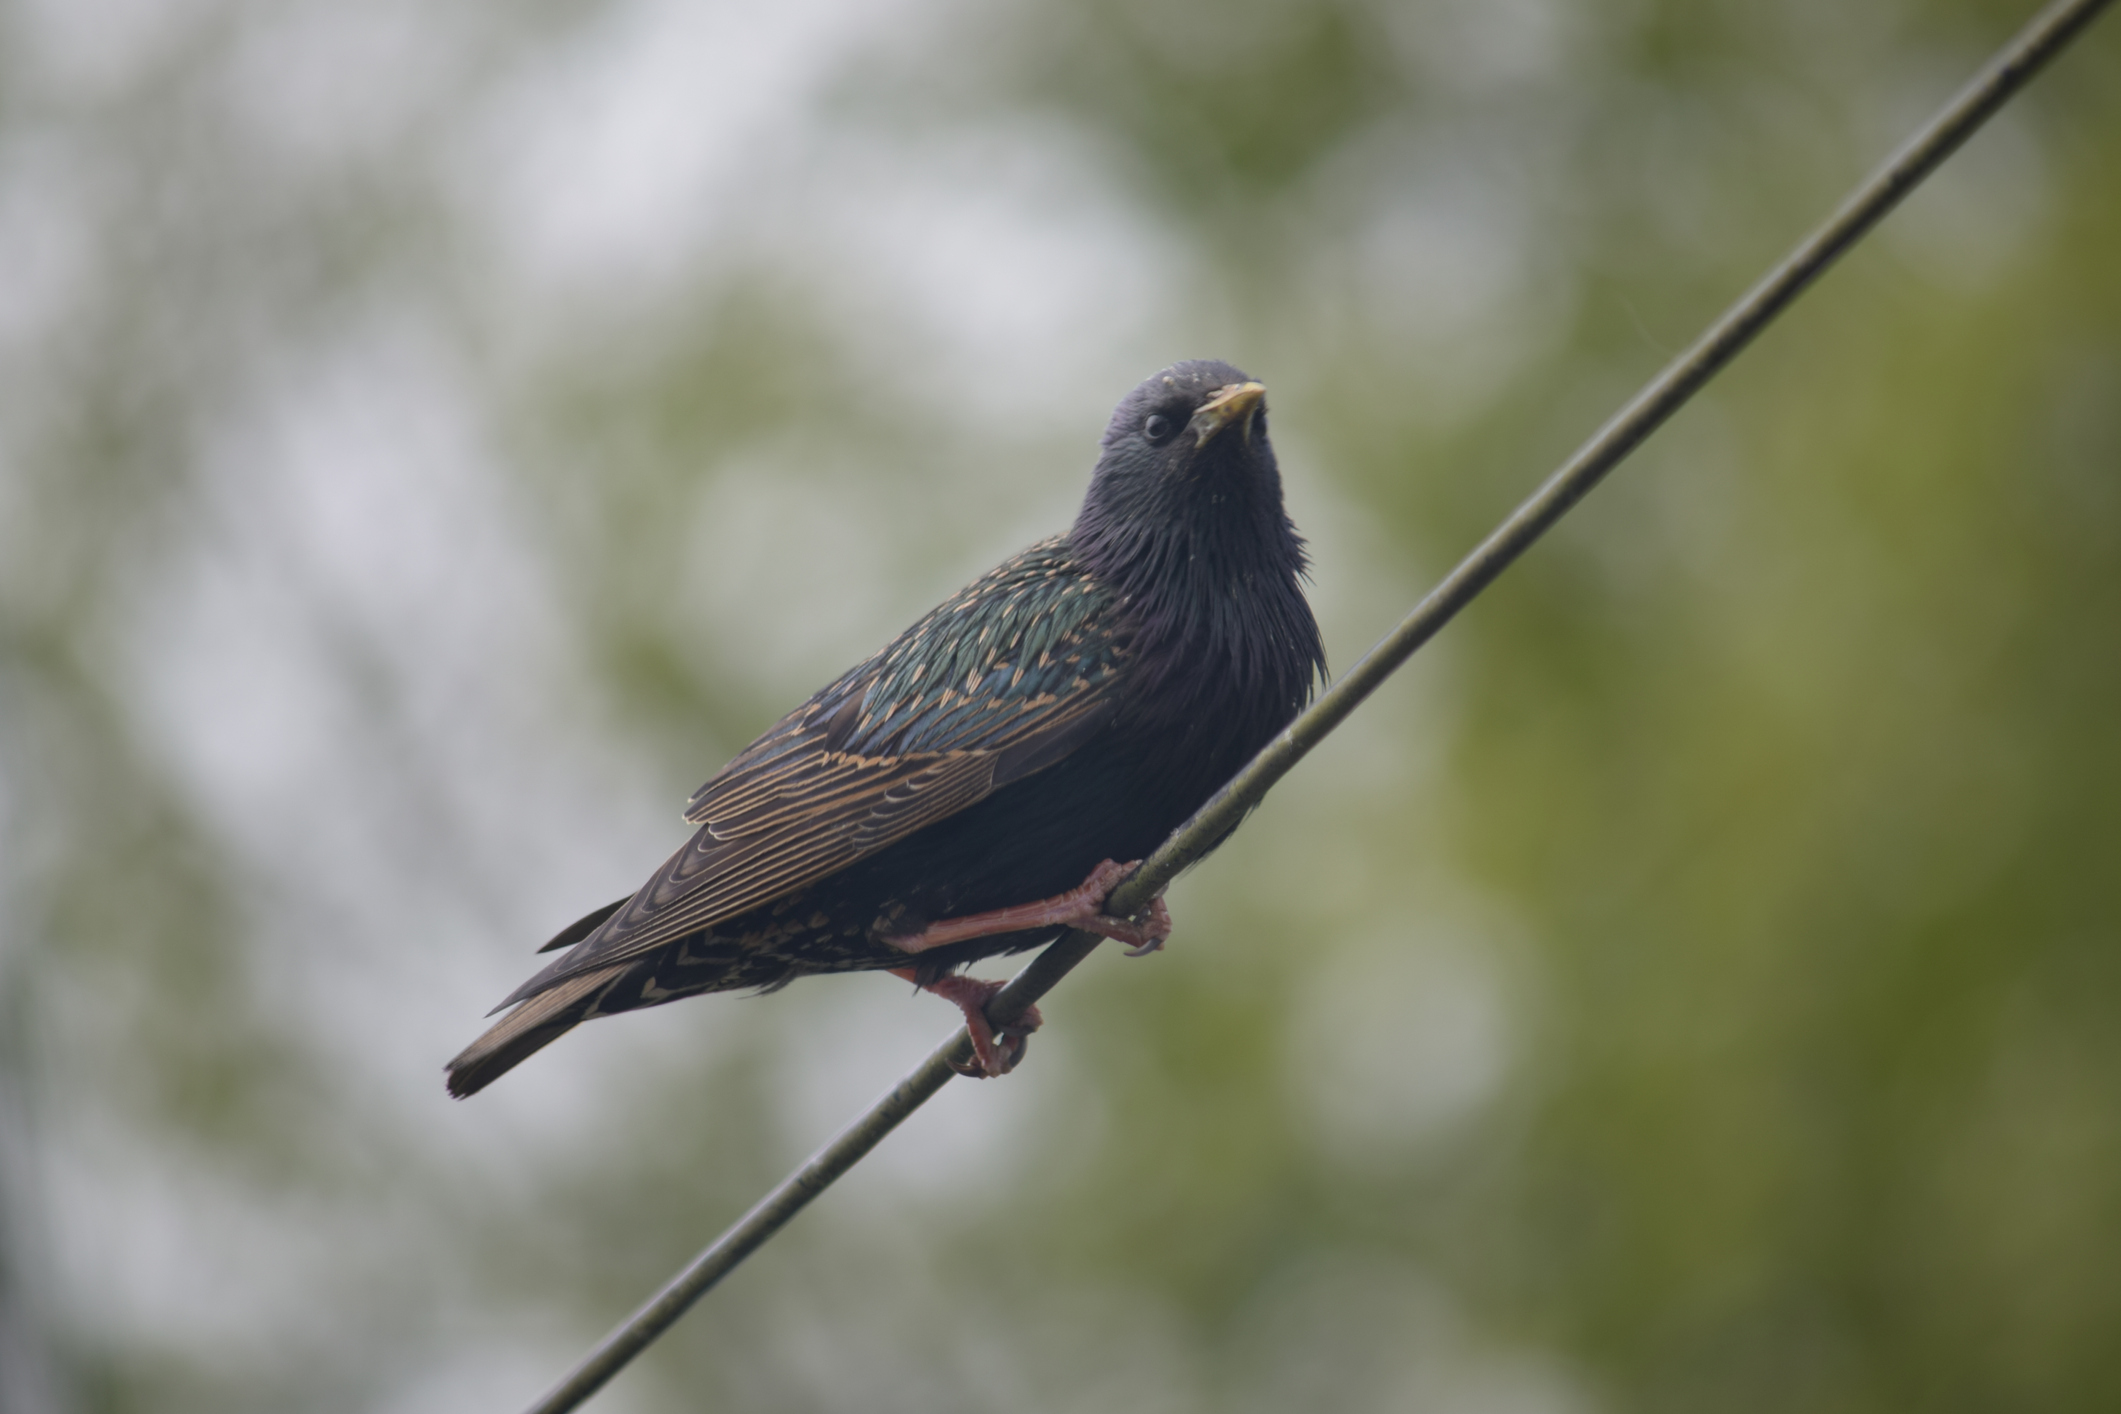 Starling on a telephone wire